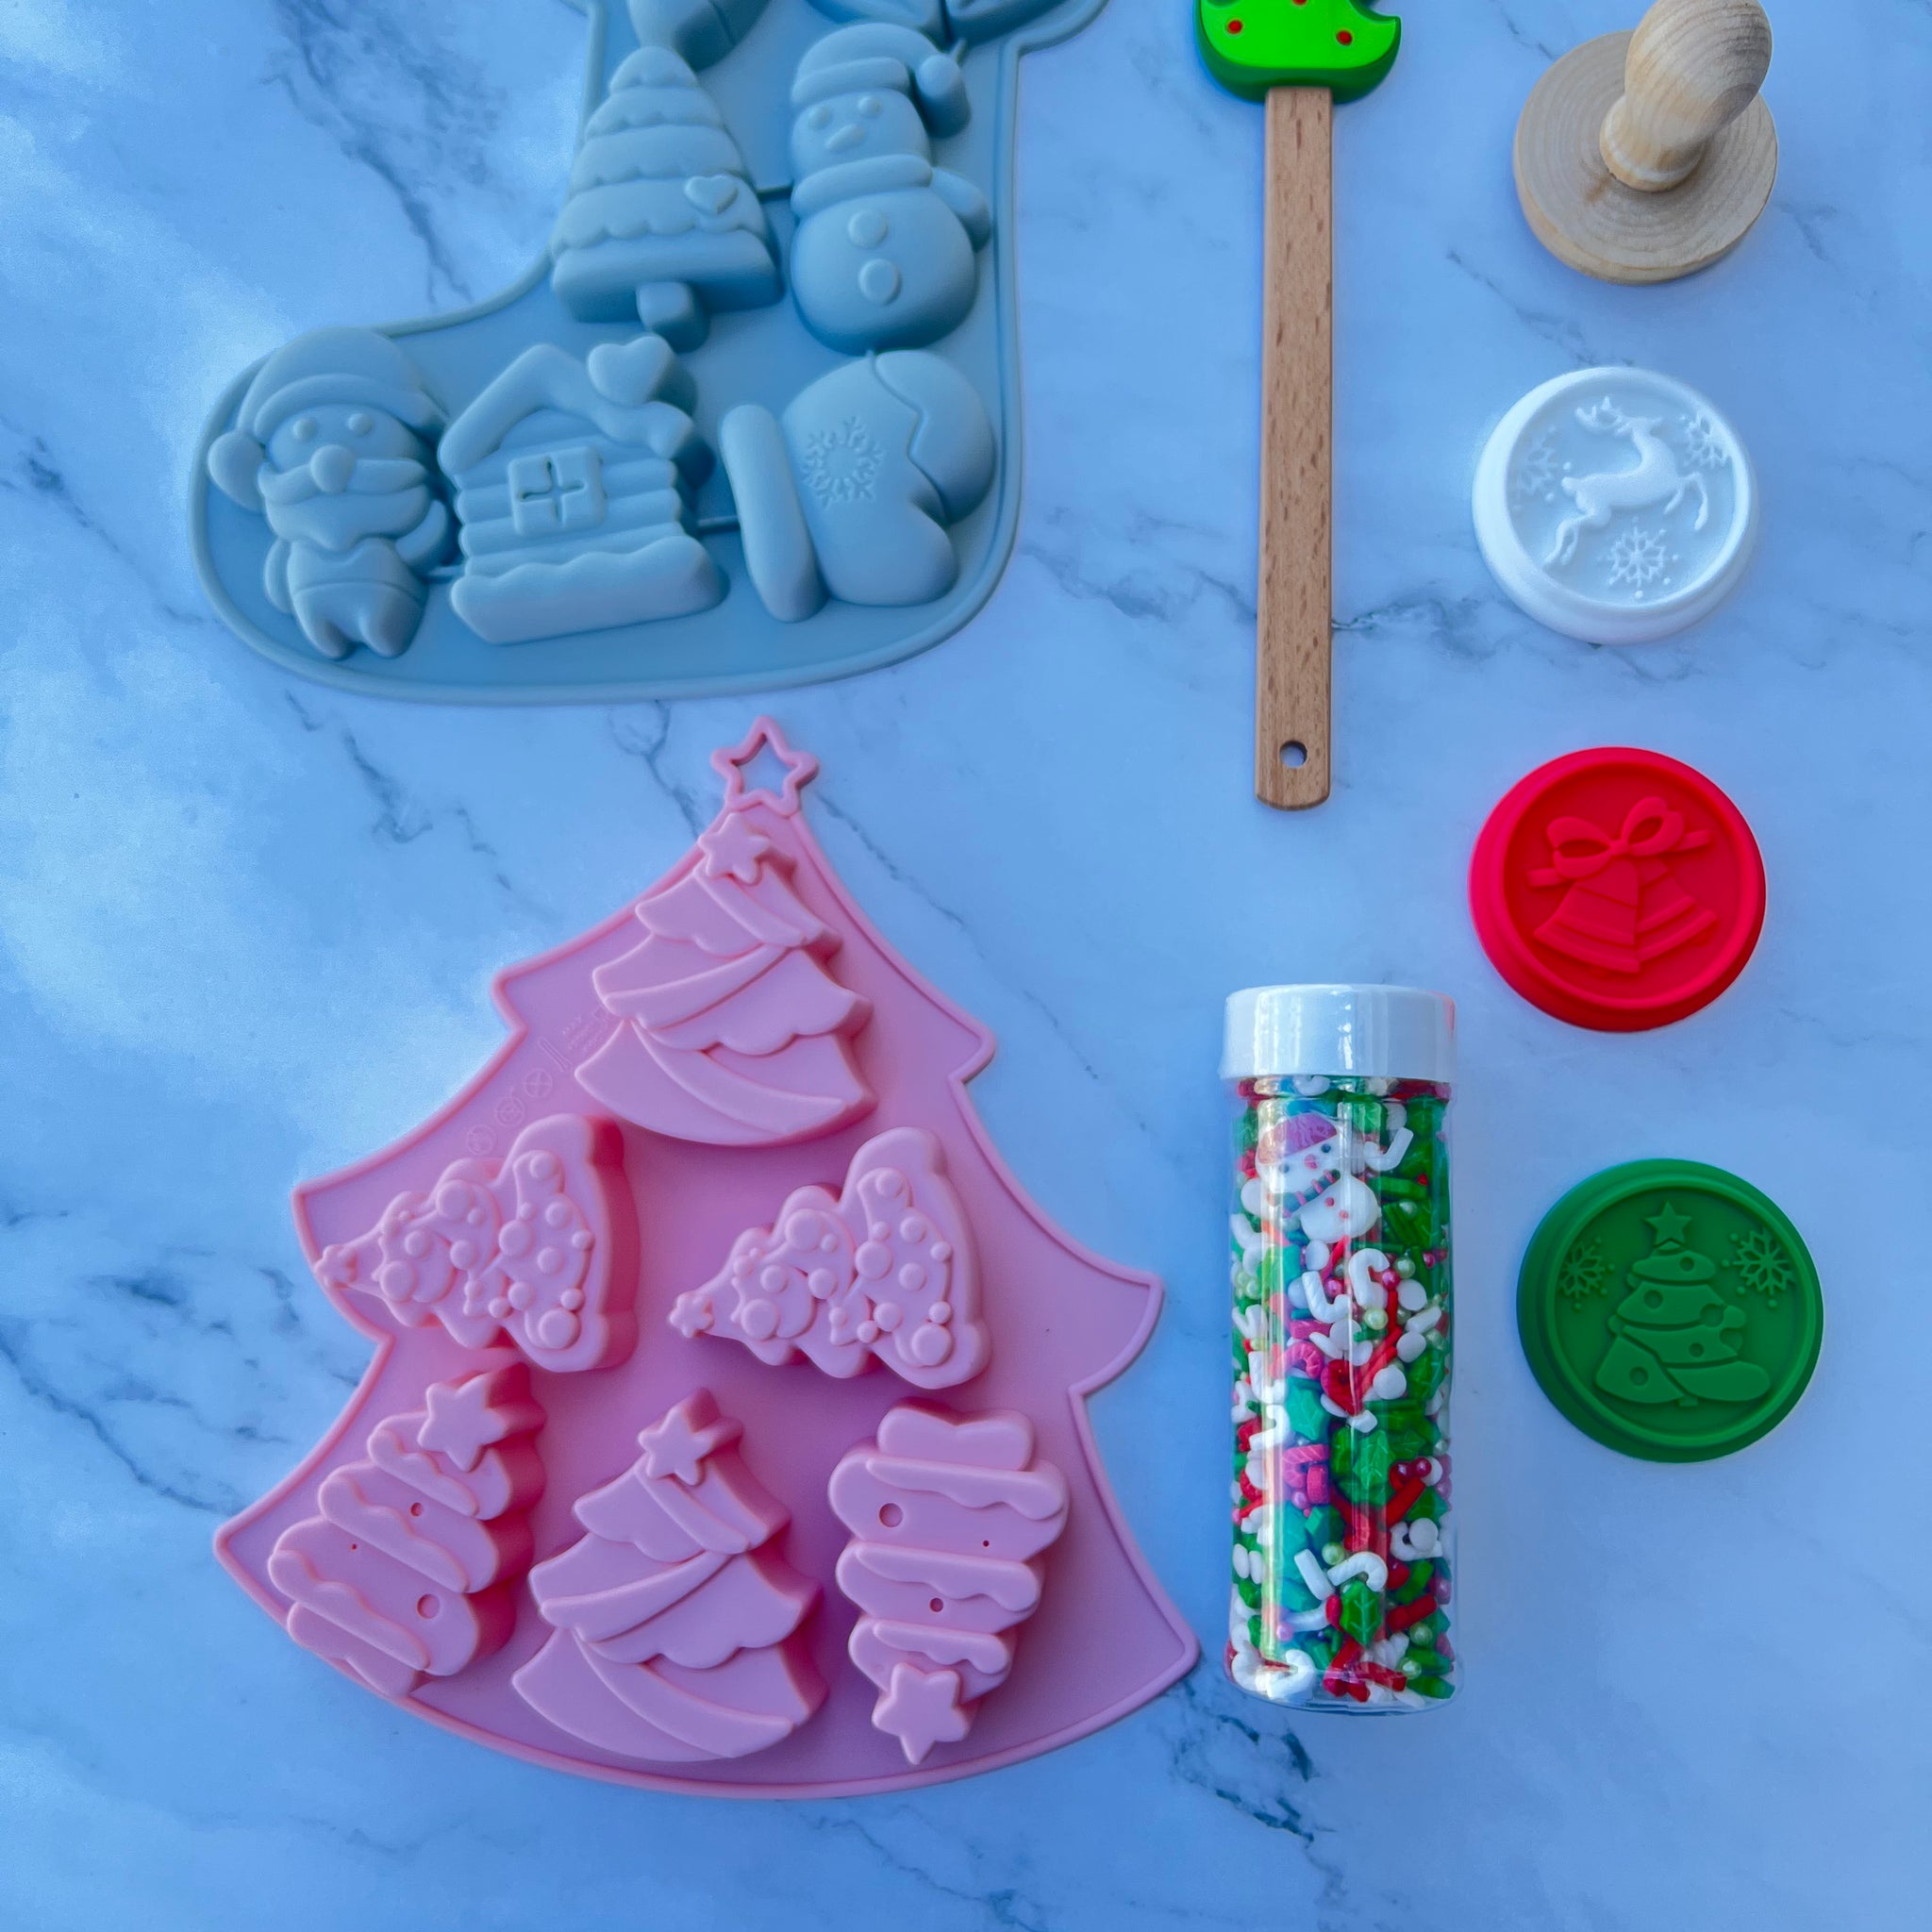 Christmas Baking Kit - 6-Cavity Stocking and Tree Molds, Three-Piece Cookie Cutter, Variety Spatula, Limited Edition Christmas Sprinkles